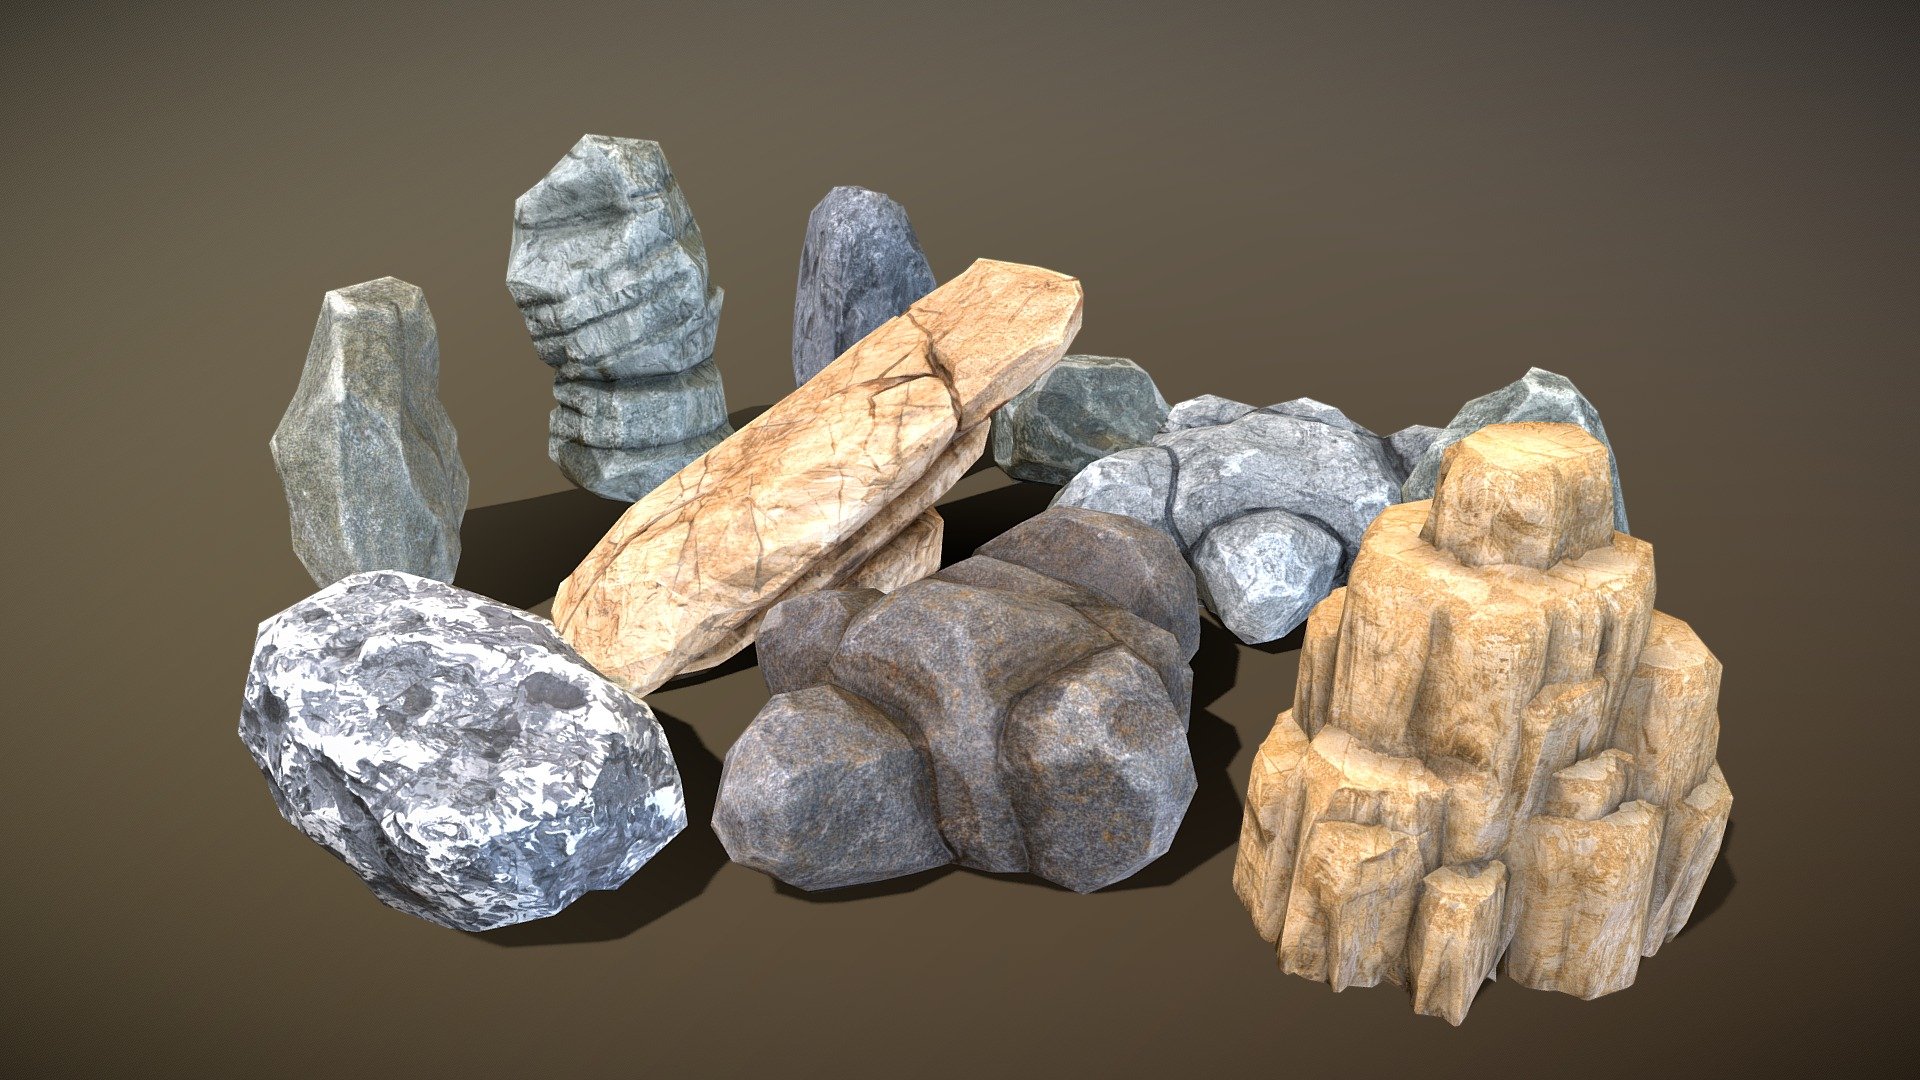 Rocks and stones pack